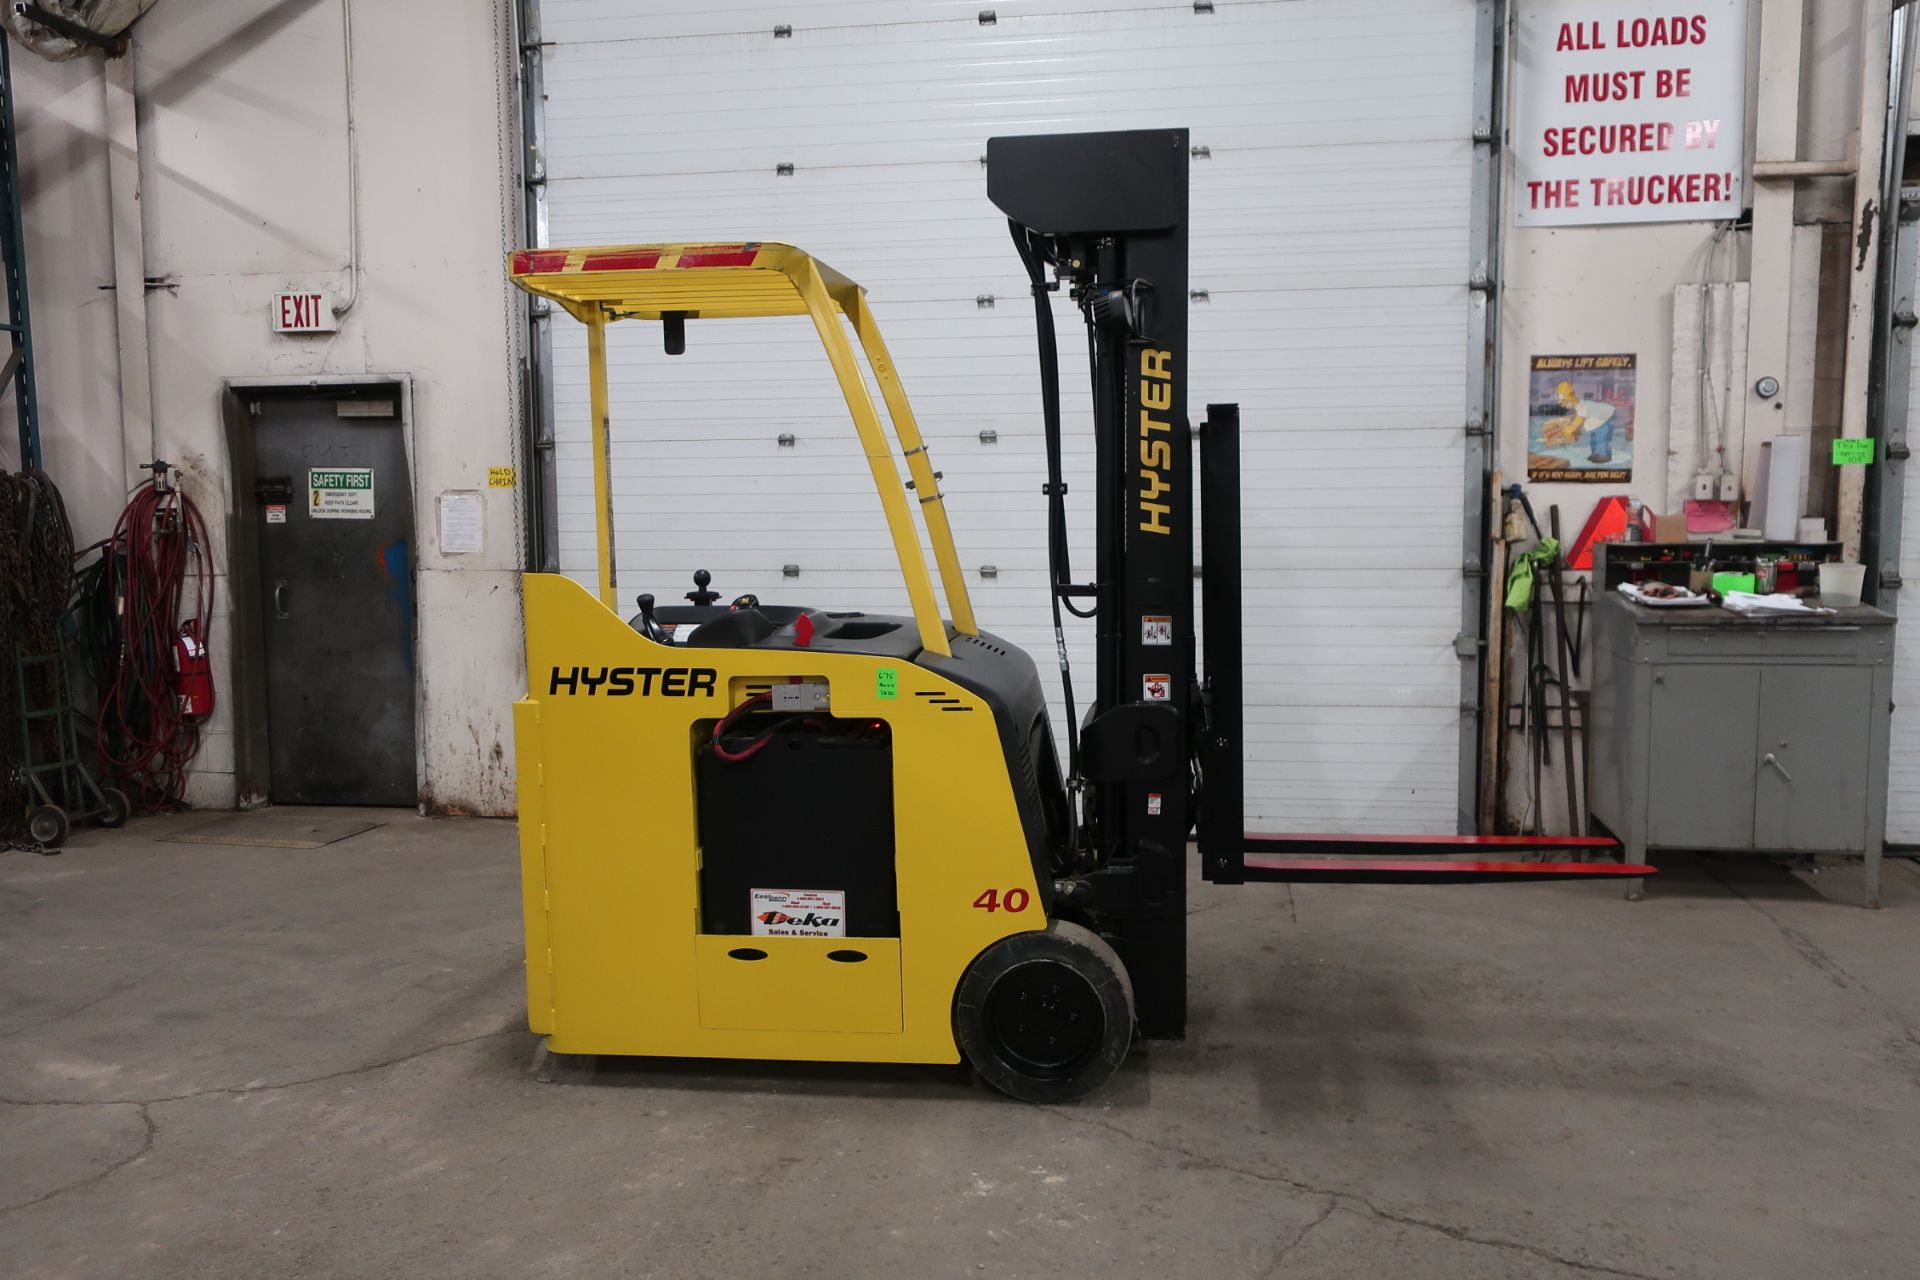 FREE CUSTOMS - 2014 Hyster Reach Truck Pallet Lifter 3200lbs capacity unit 4-stage ELECTRIC with